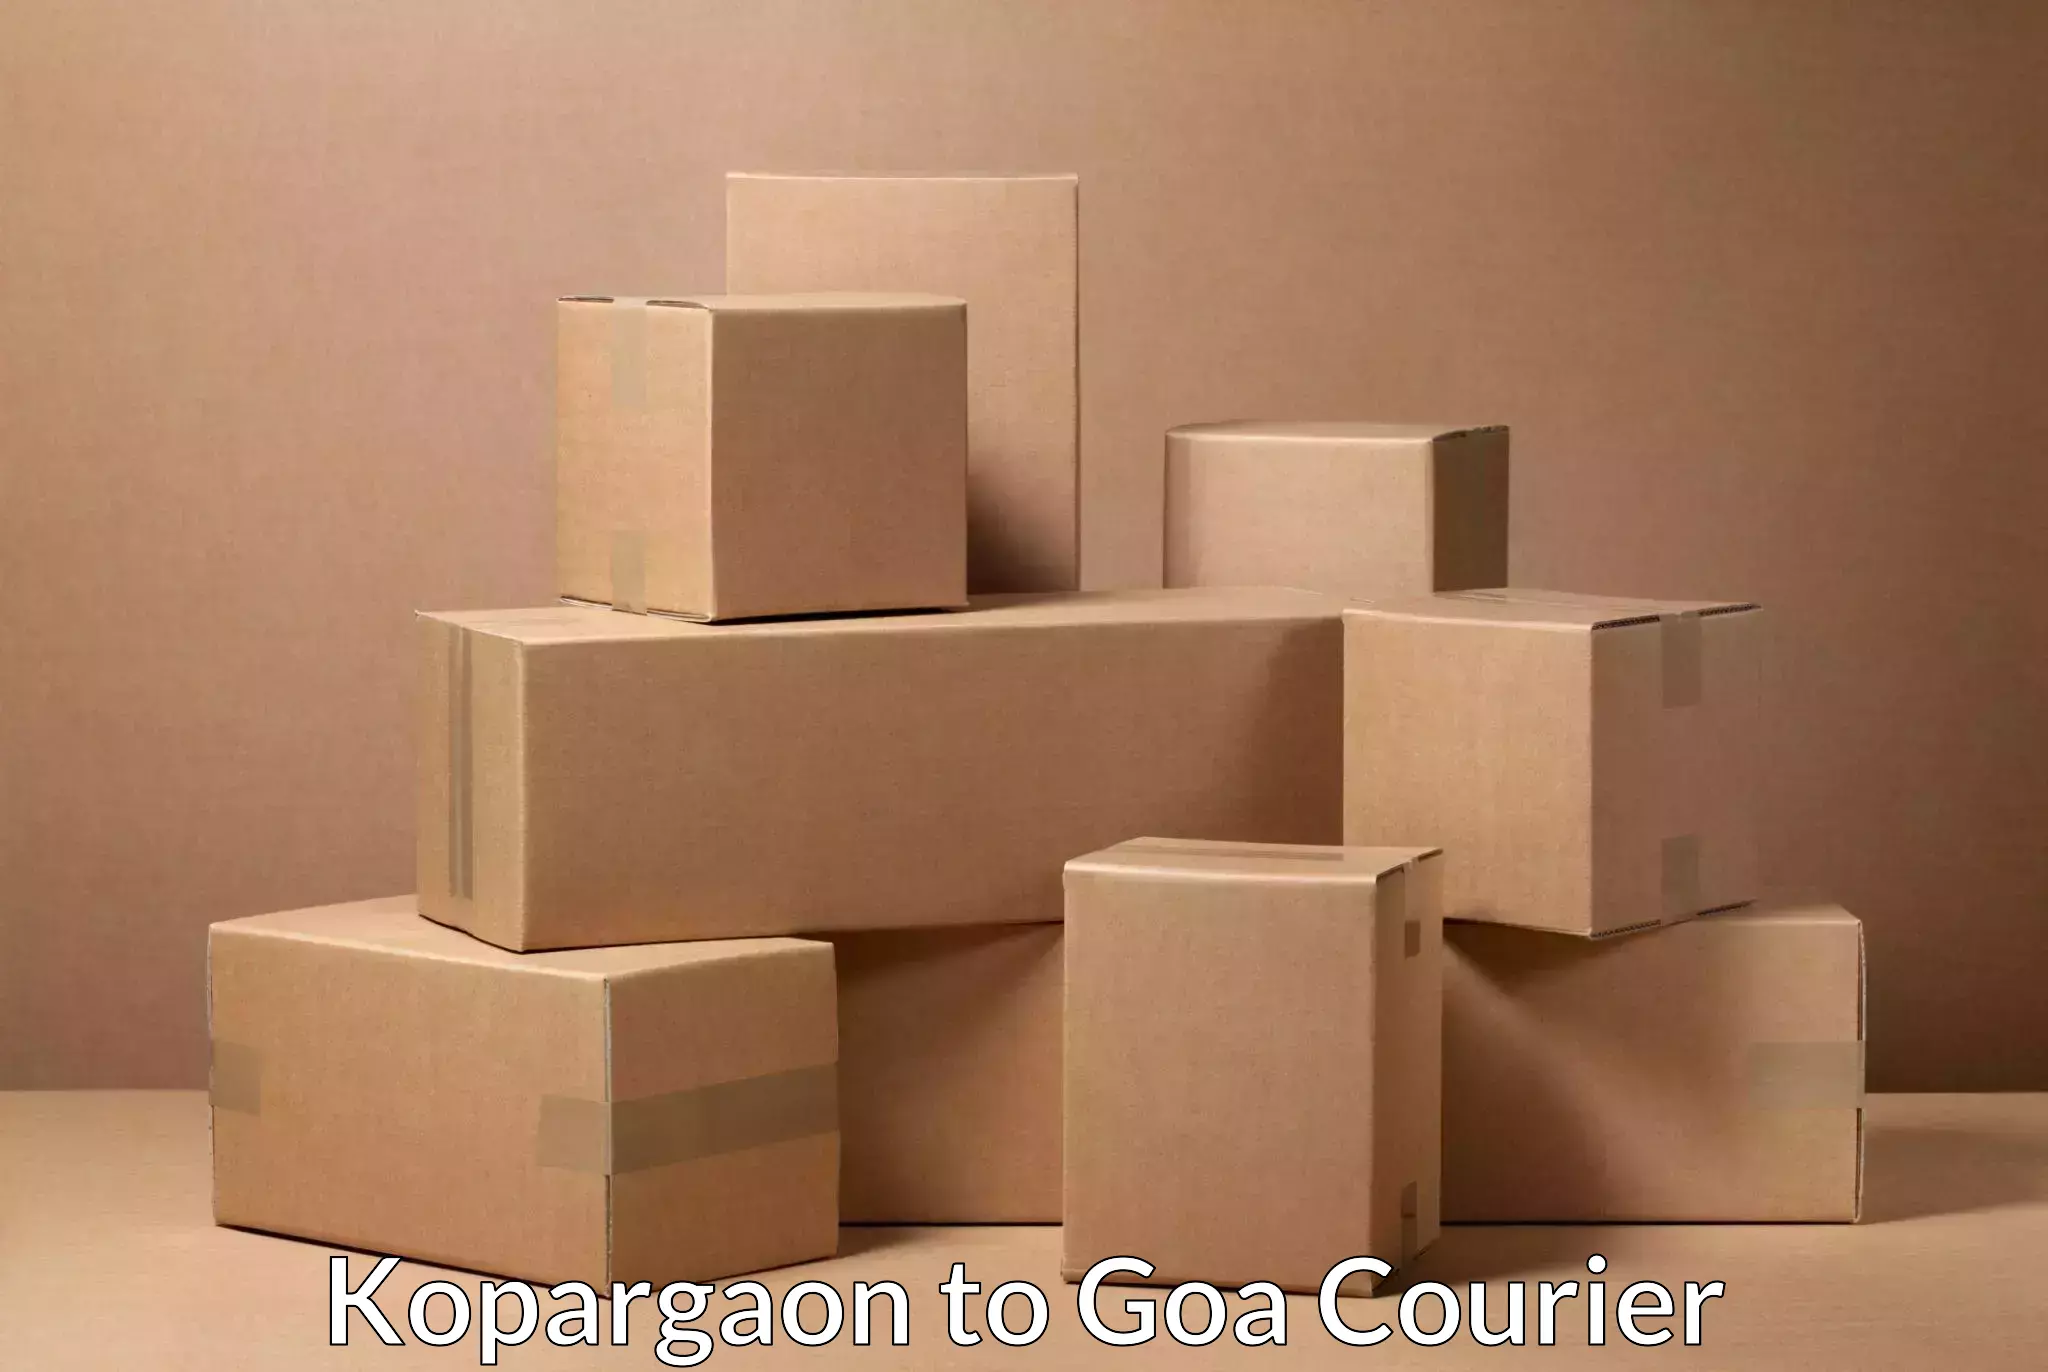 State-of-the-art courier technology Kopargaon to Ponda